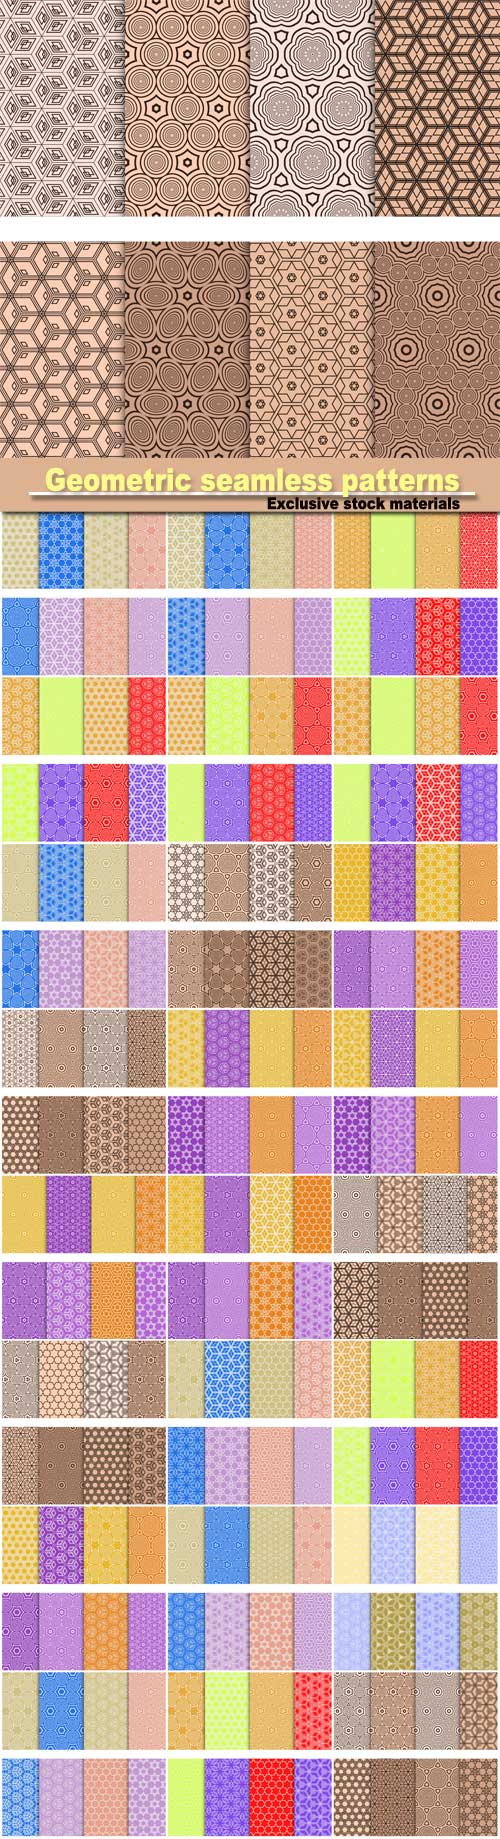 Geometric seamless patterns of the figures